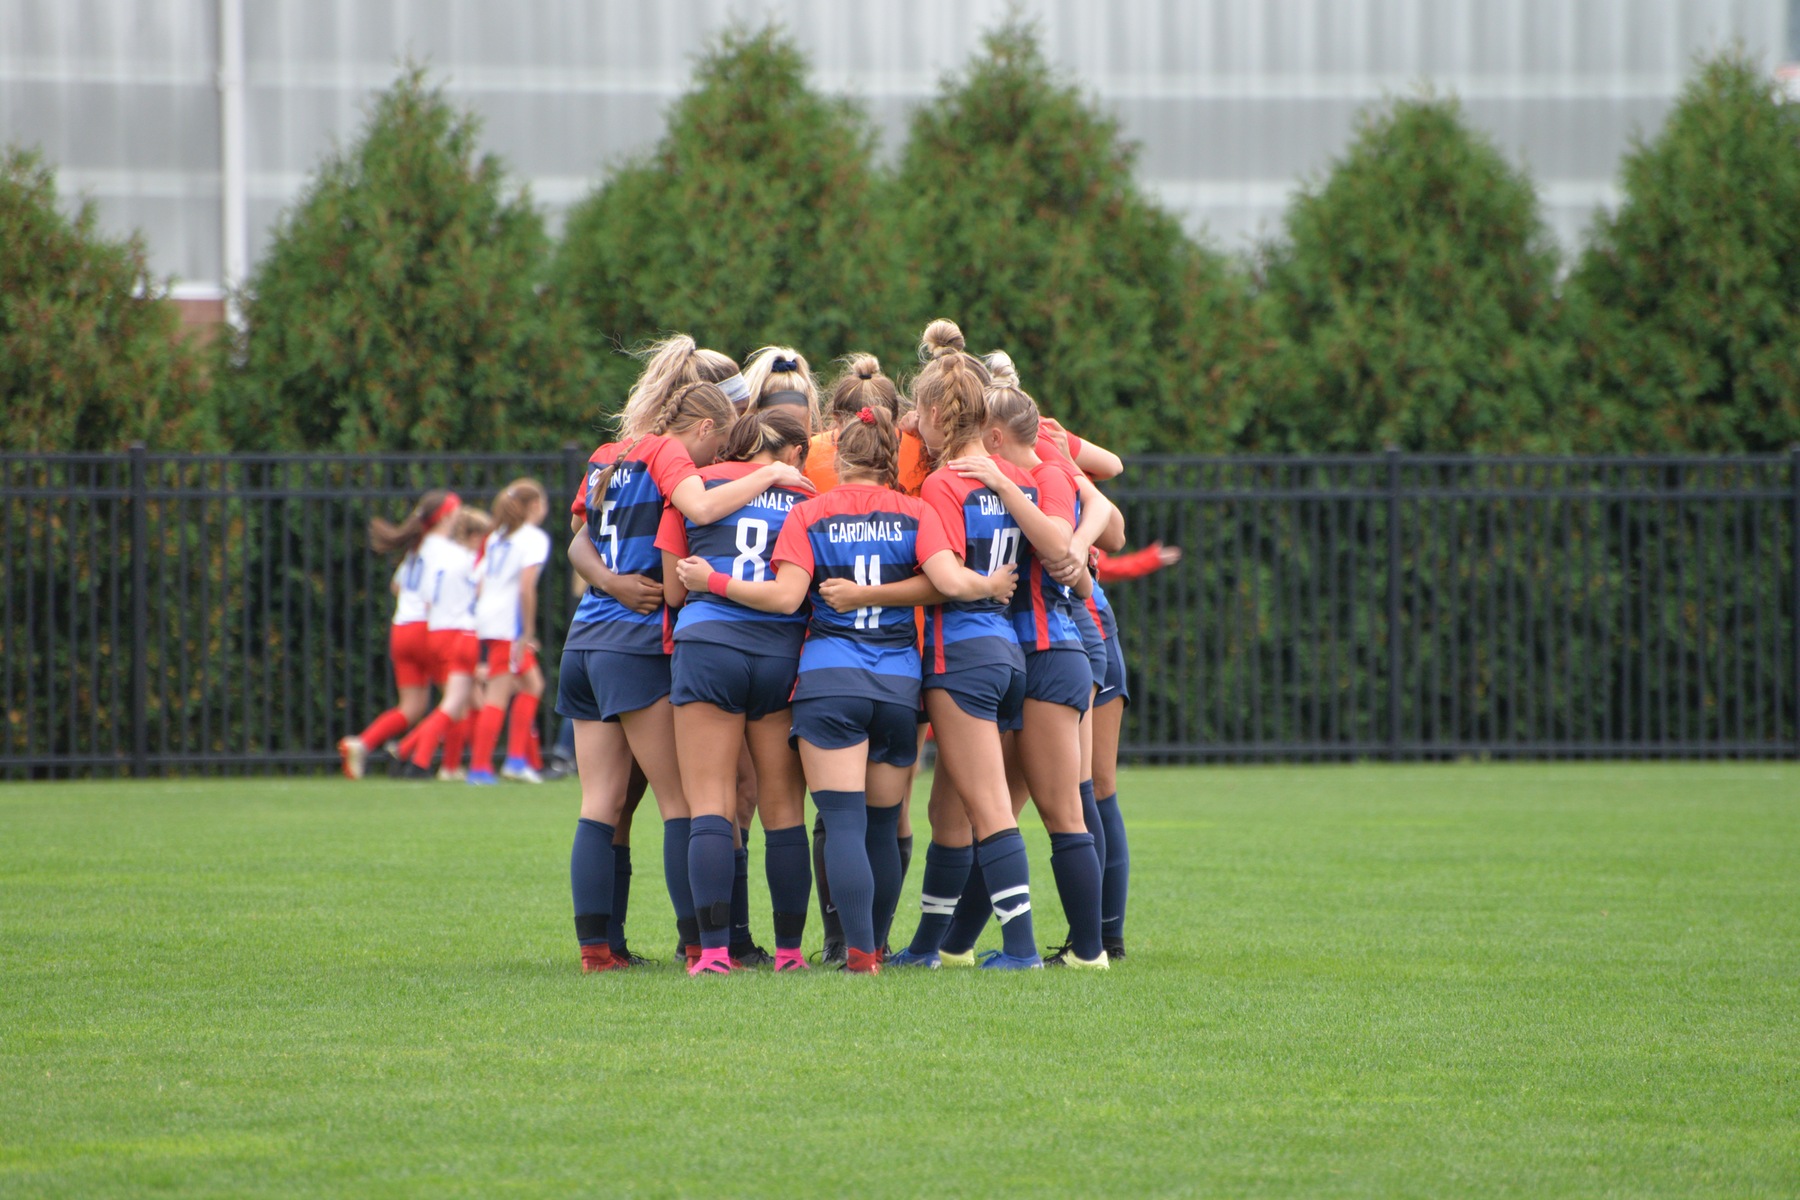 SVSU moves to 6-1 in GLIAC play with shutout over Davenport